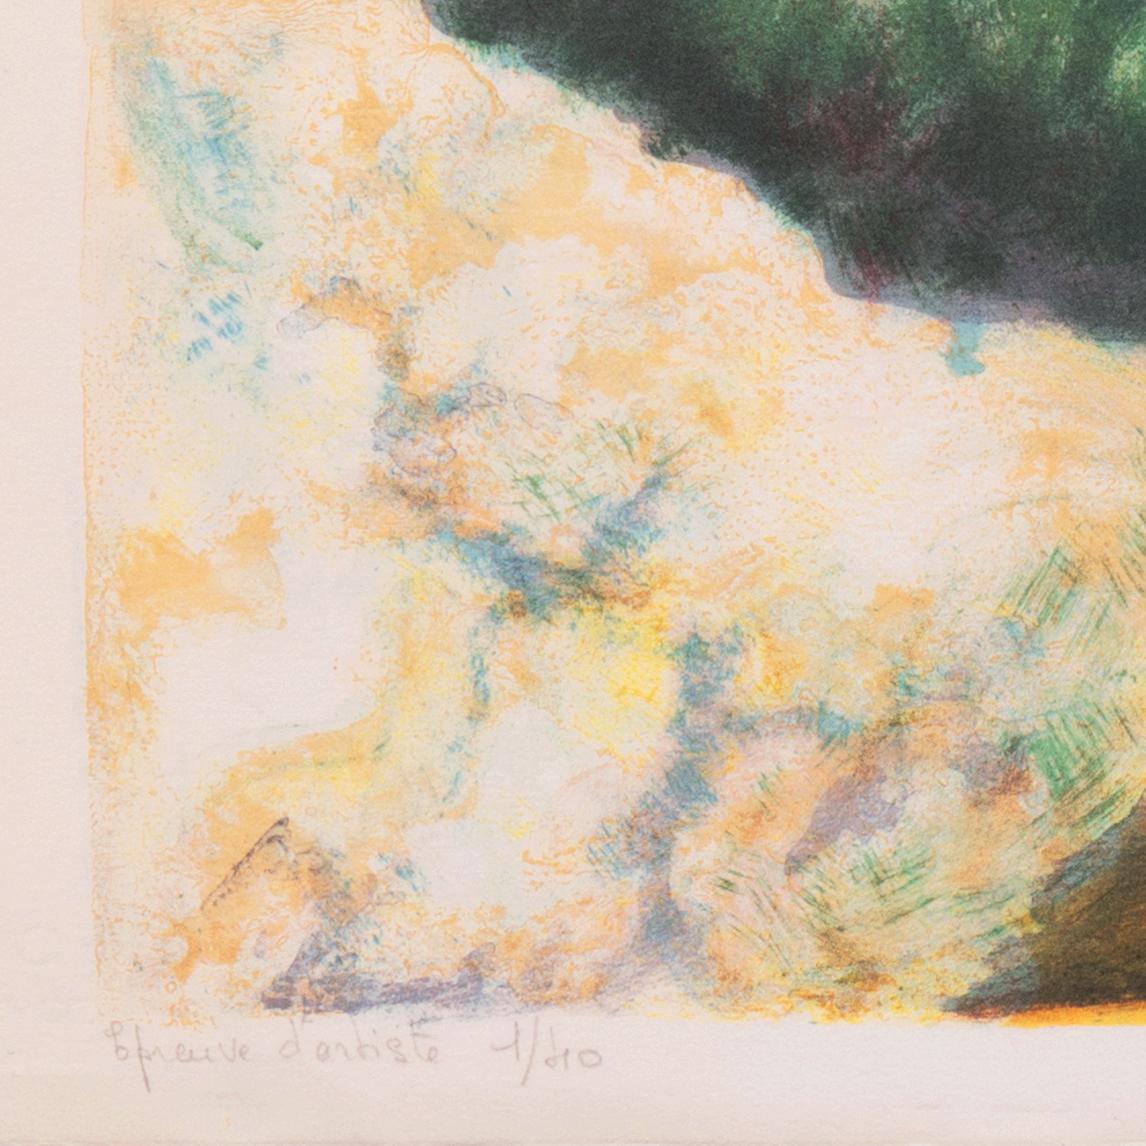 Signed lower right, 'Zarou' for Victor Zarou (French, b. 1930), inscribed 'Epreuve d'Artiste' with number and limitation 1/40, lower left, and titled, lower center 'Chemin des Bastides'.

Born in 1930 in Gassin, a small village near Saint-Tropez,